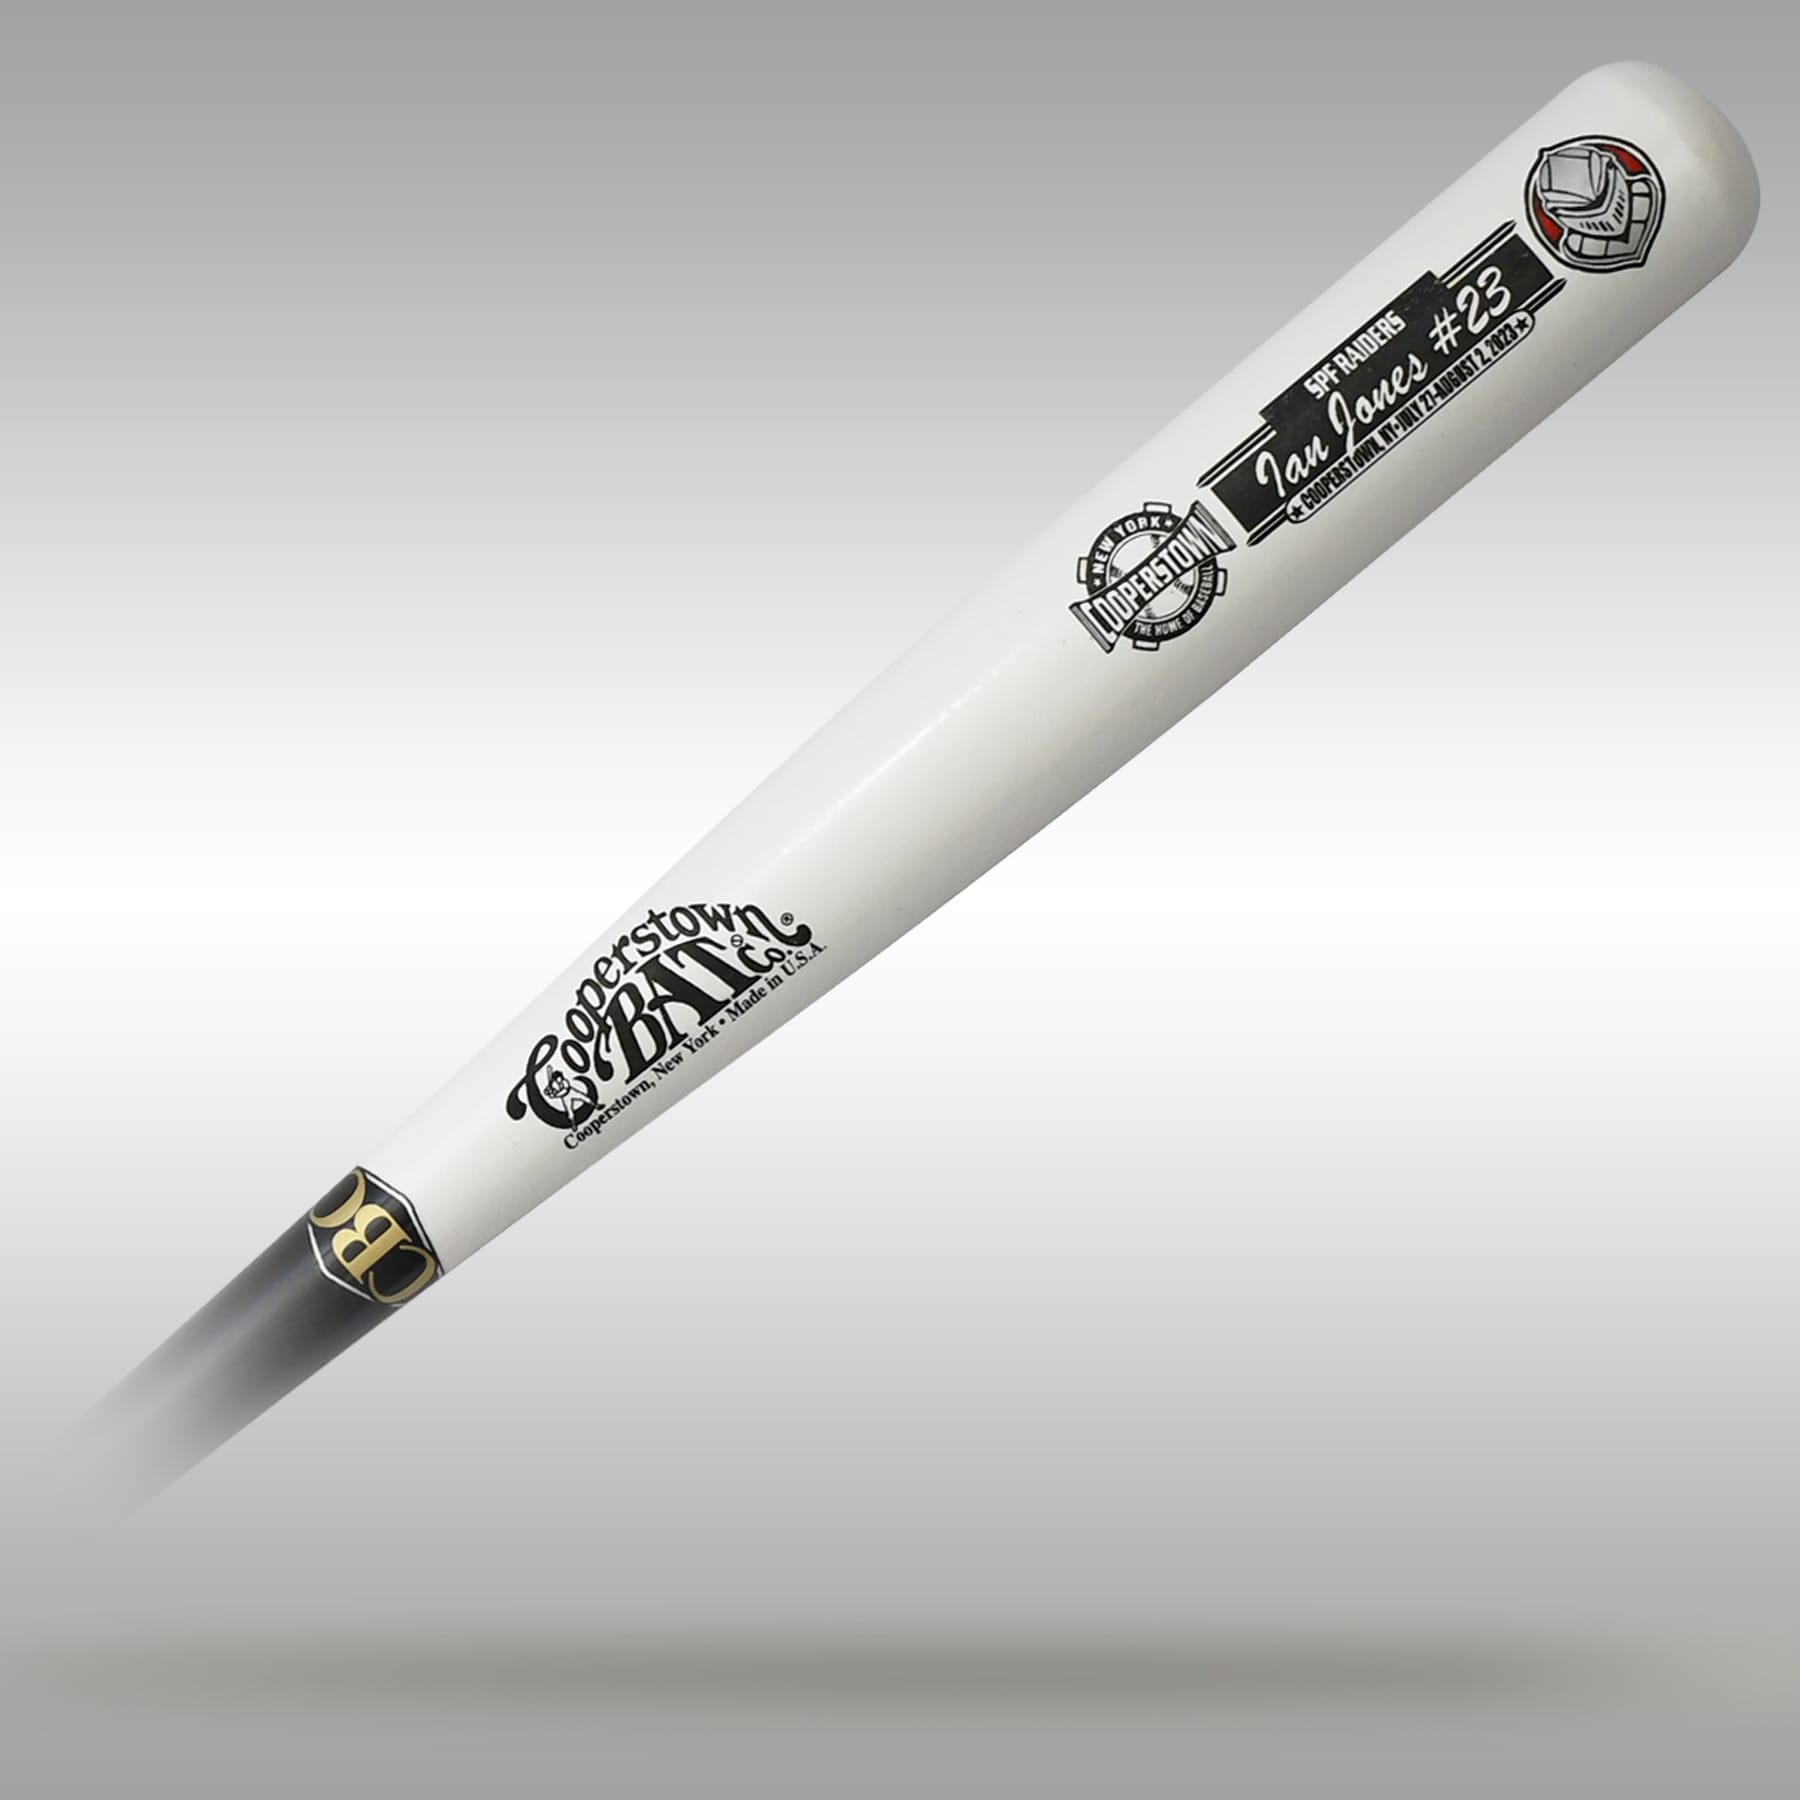 Cooperstown Tournament Player Design - Cooperstown Bat Company